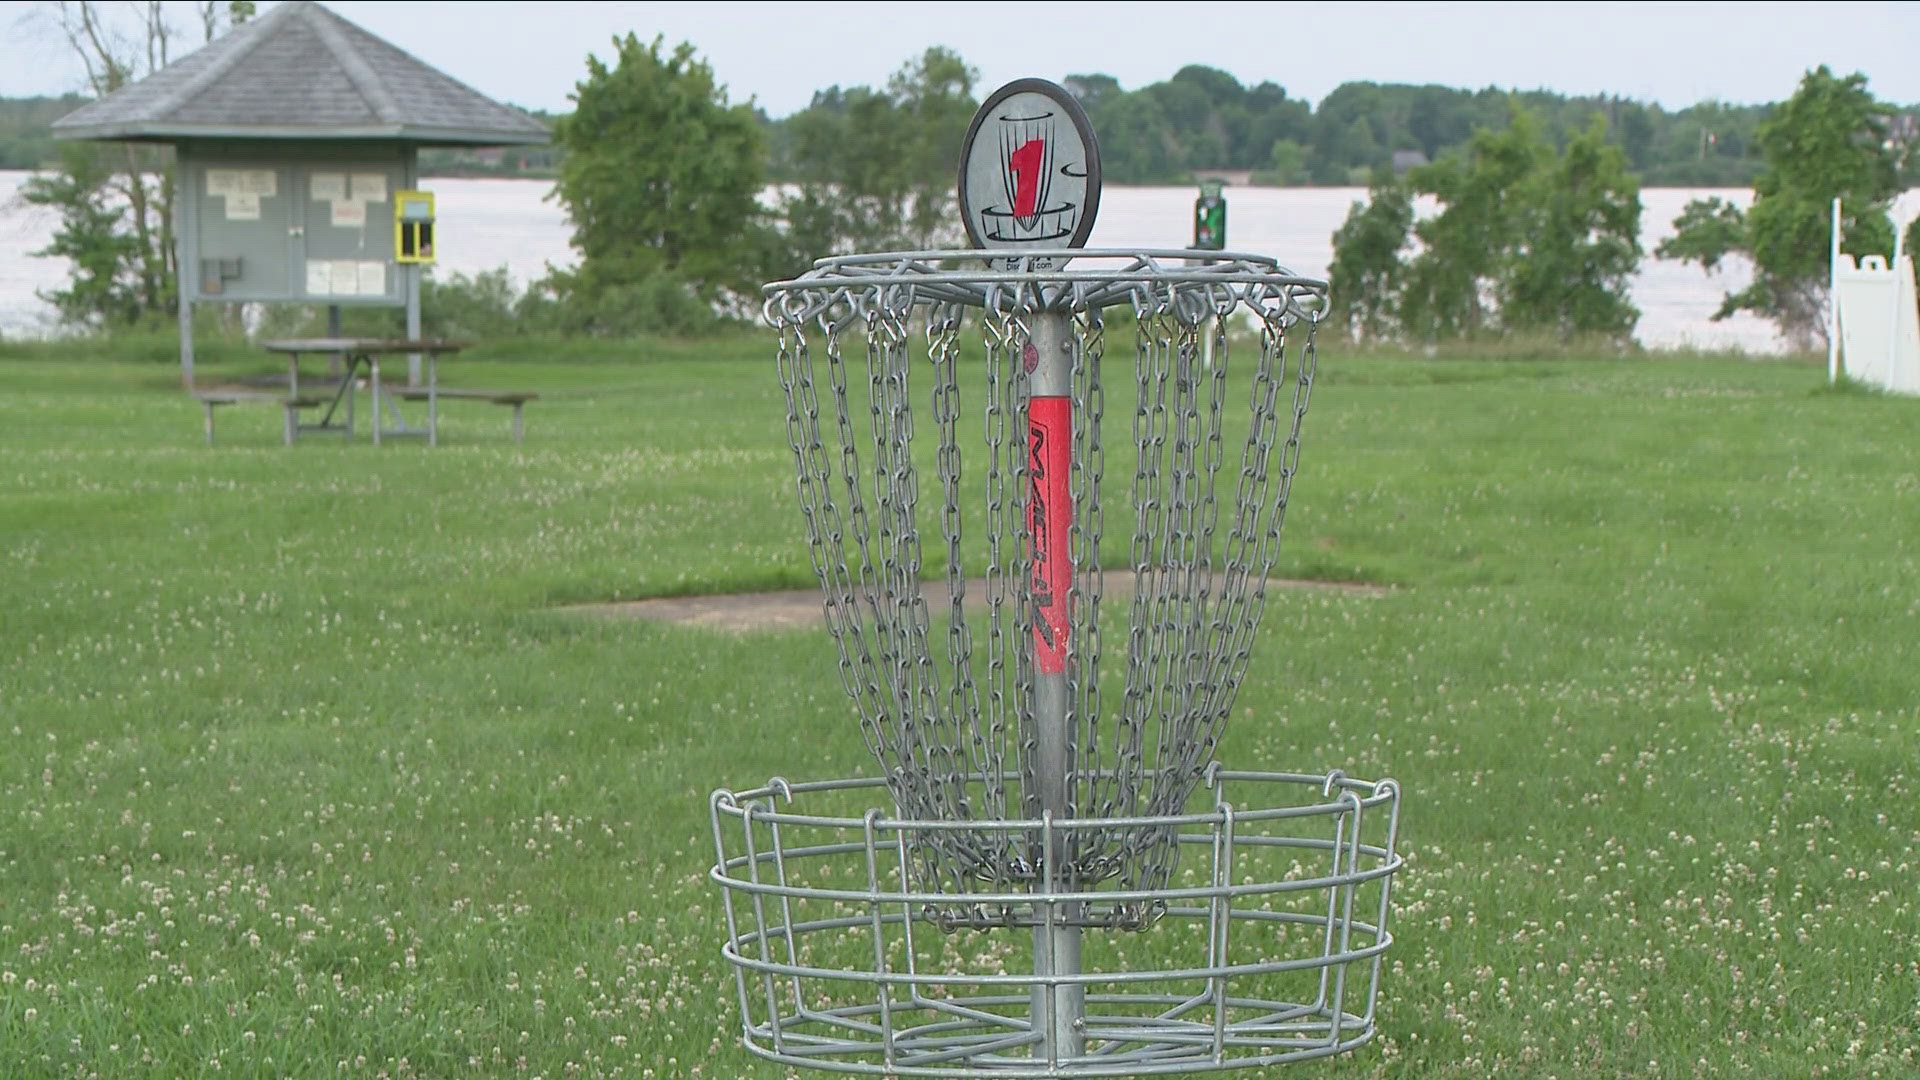 Disc Golf grows in popularity in Grand Island